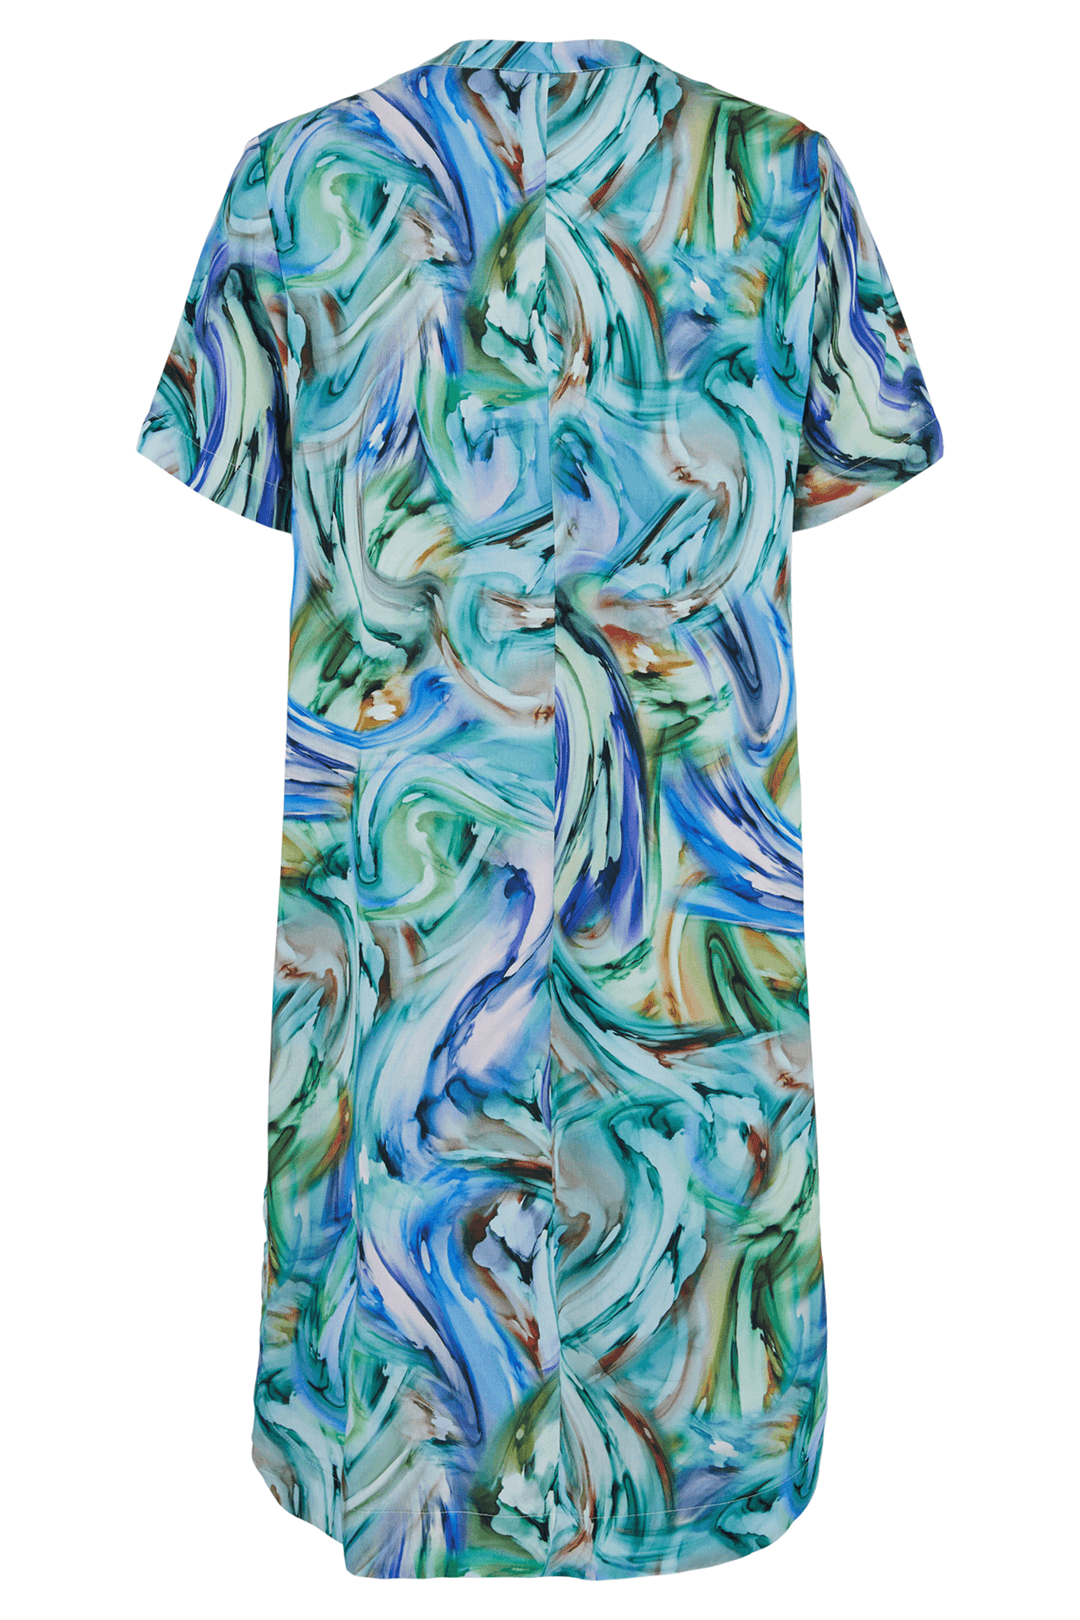 Sunday 6653 Blue Watercolour Marbled Effect Dress